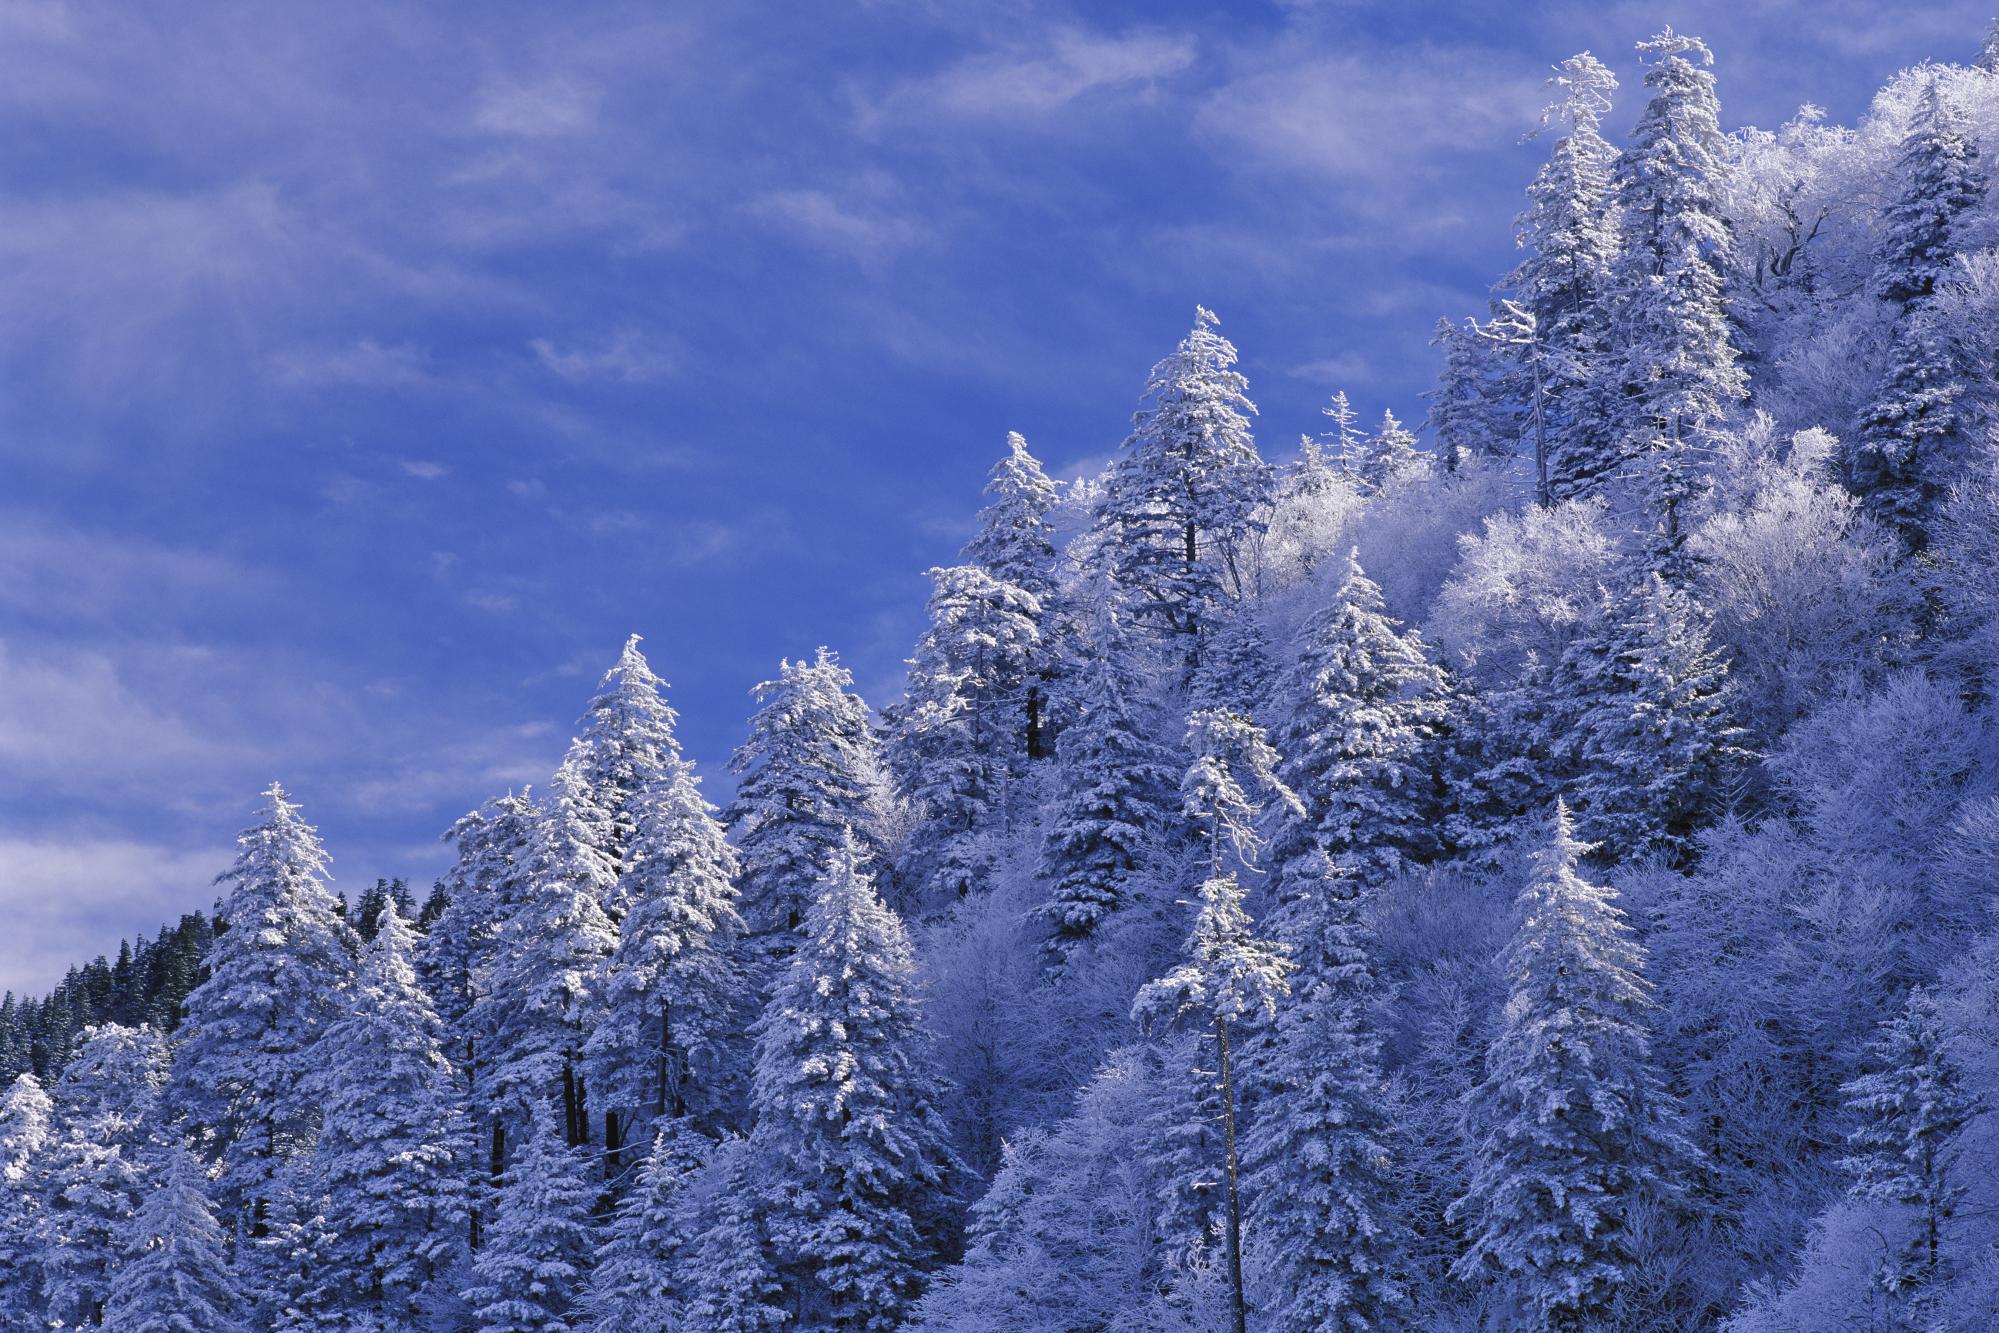 When Will I See Snow in the Smoky Mountains? Mountain Travel Guide